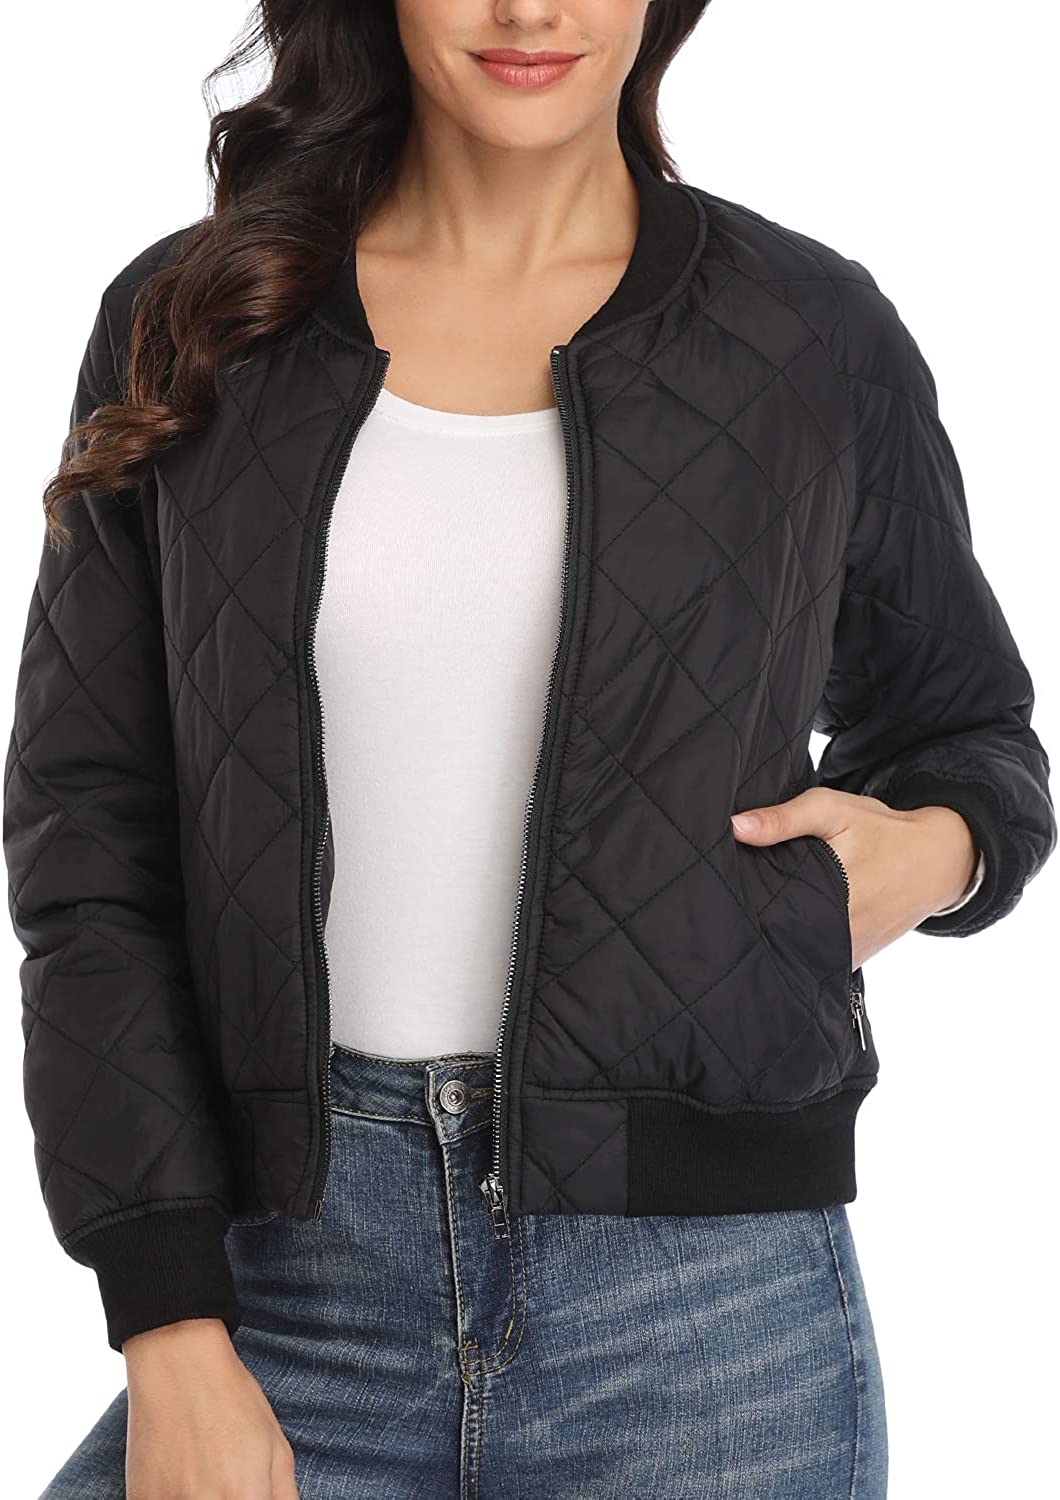 Dilgul Womens Quilted Jacket Lightweight Long Sleeves Zip Up Raglan Bomber Jackets with Pockets